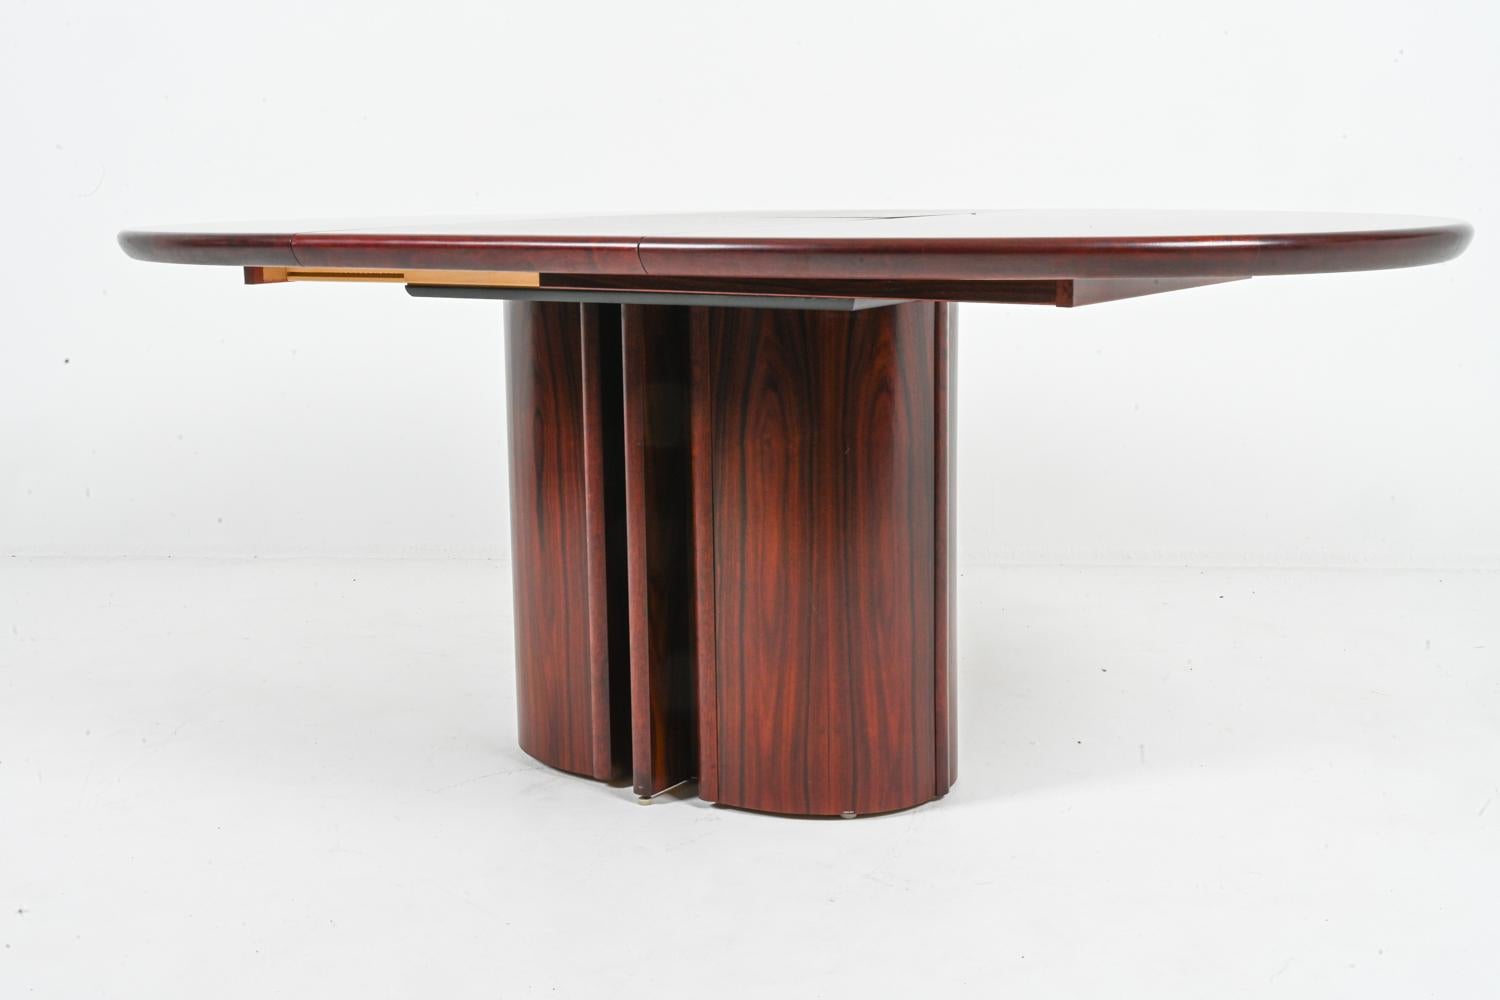 This exquisite dining table embodies the elegance and functionality of Danish Art Deco design. Crafted by renowned Danish furniture maker Skovby, the table seamlessly blends geometric forms with rich materials, creating a statement piece for the